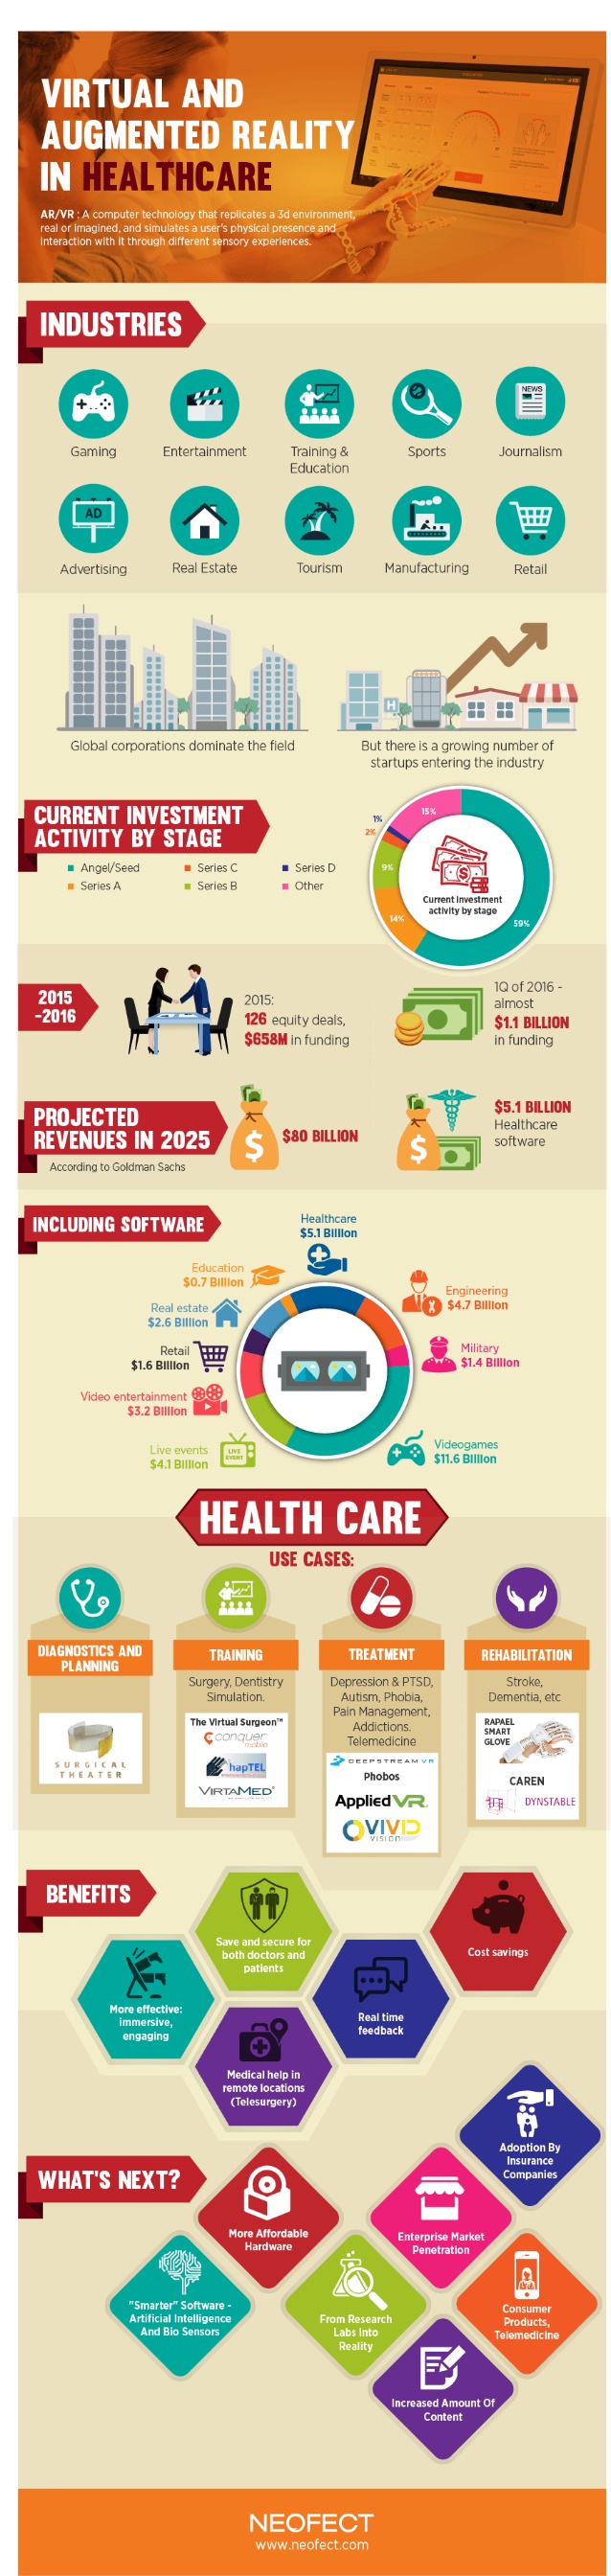 virtual-reality-in-healthcare-1-638